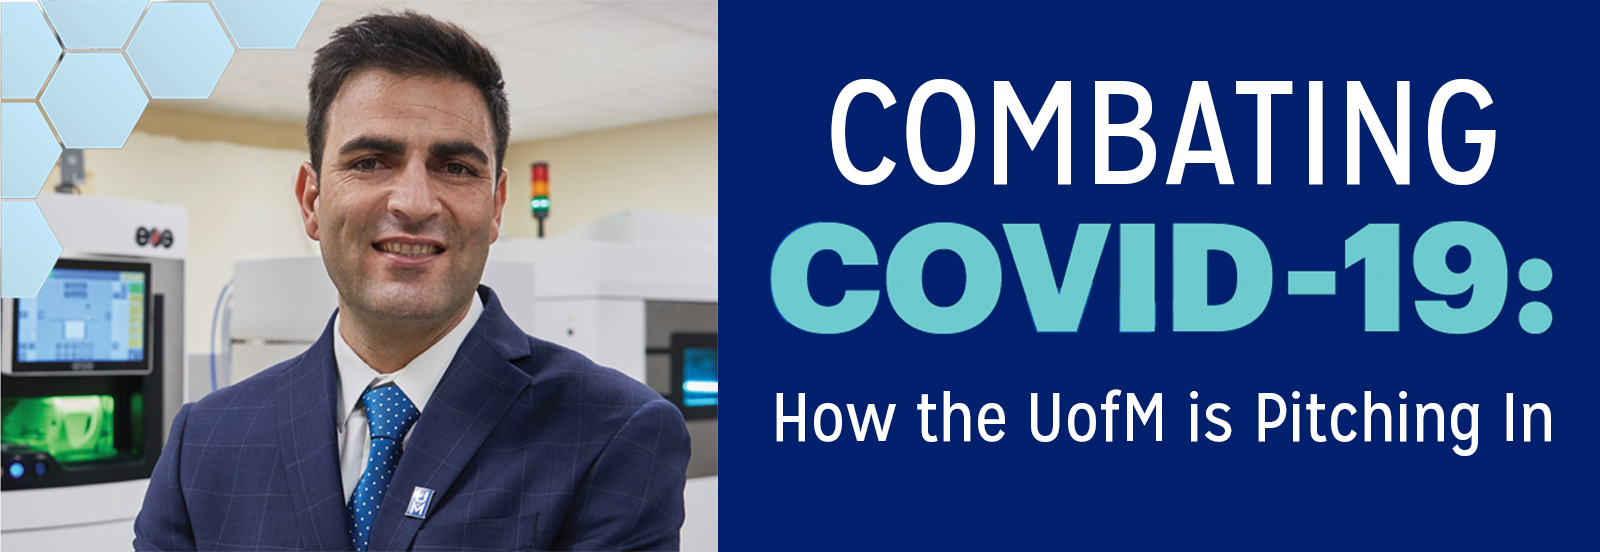 Combating COVID-19: How the UofM is Pitching In